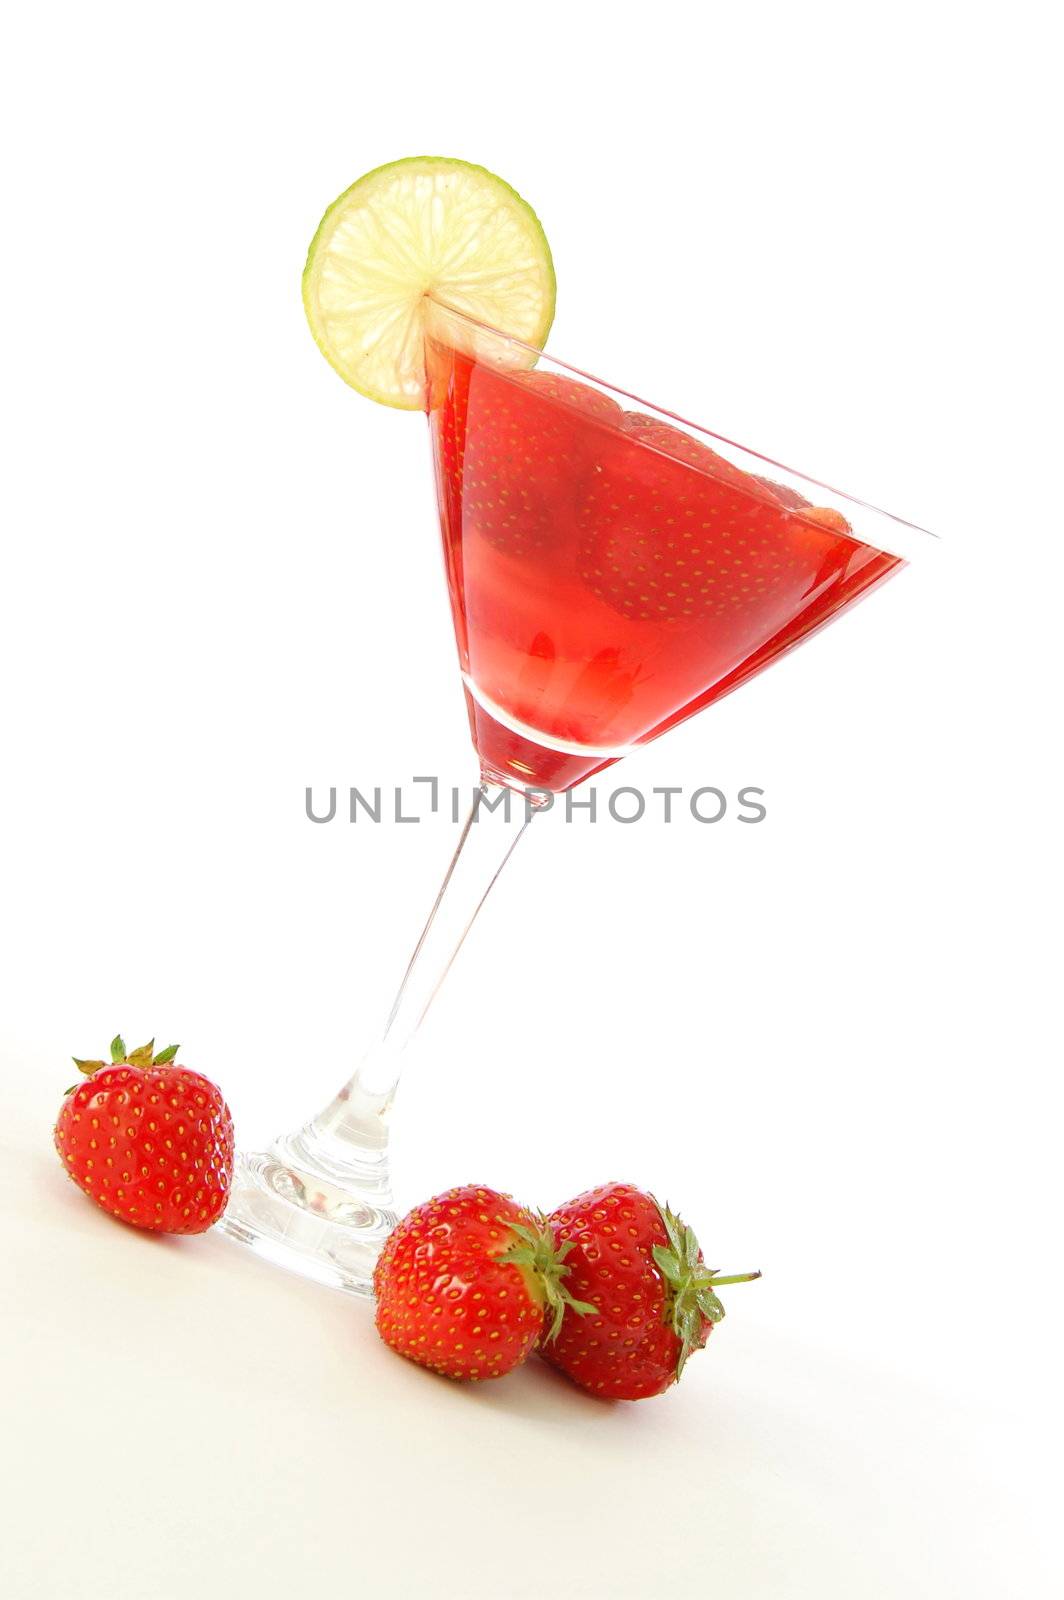 strawberry juice or cocktail by gunnar3000